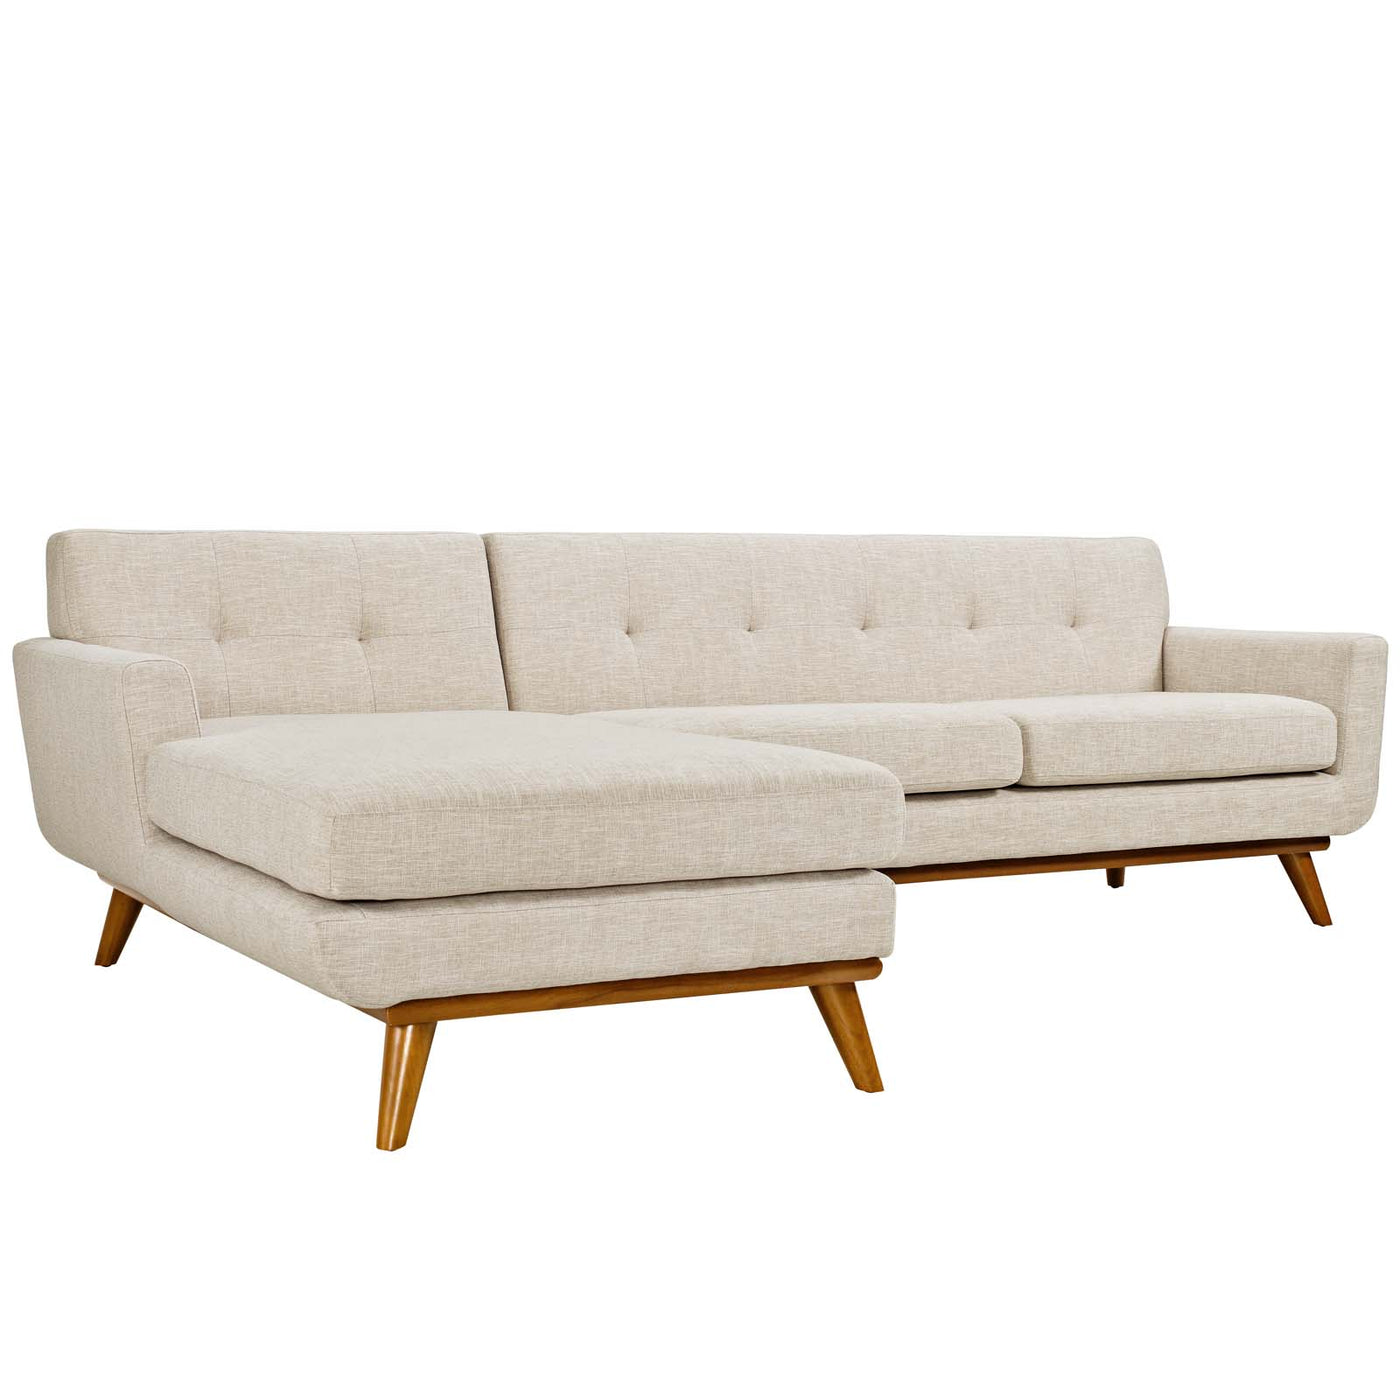 Engage Left-Facing Upholstered Fabric Sectional Sofa